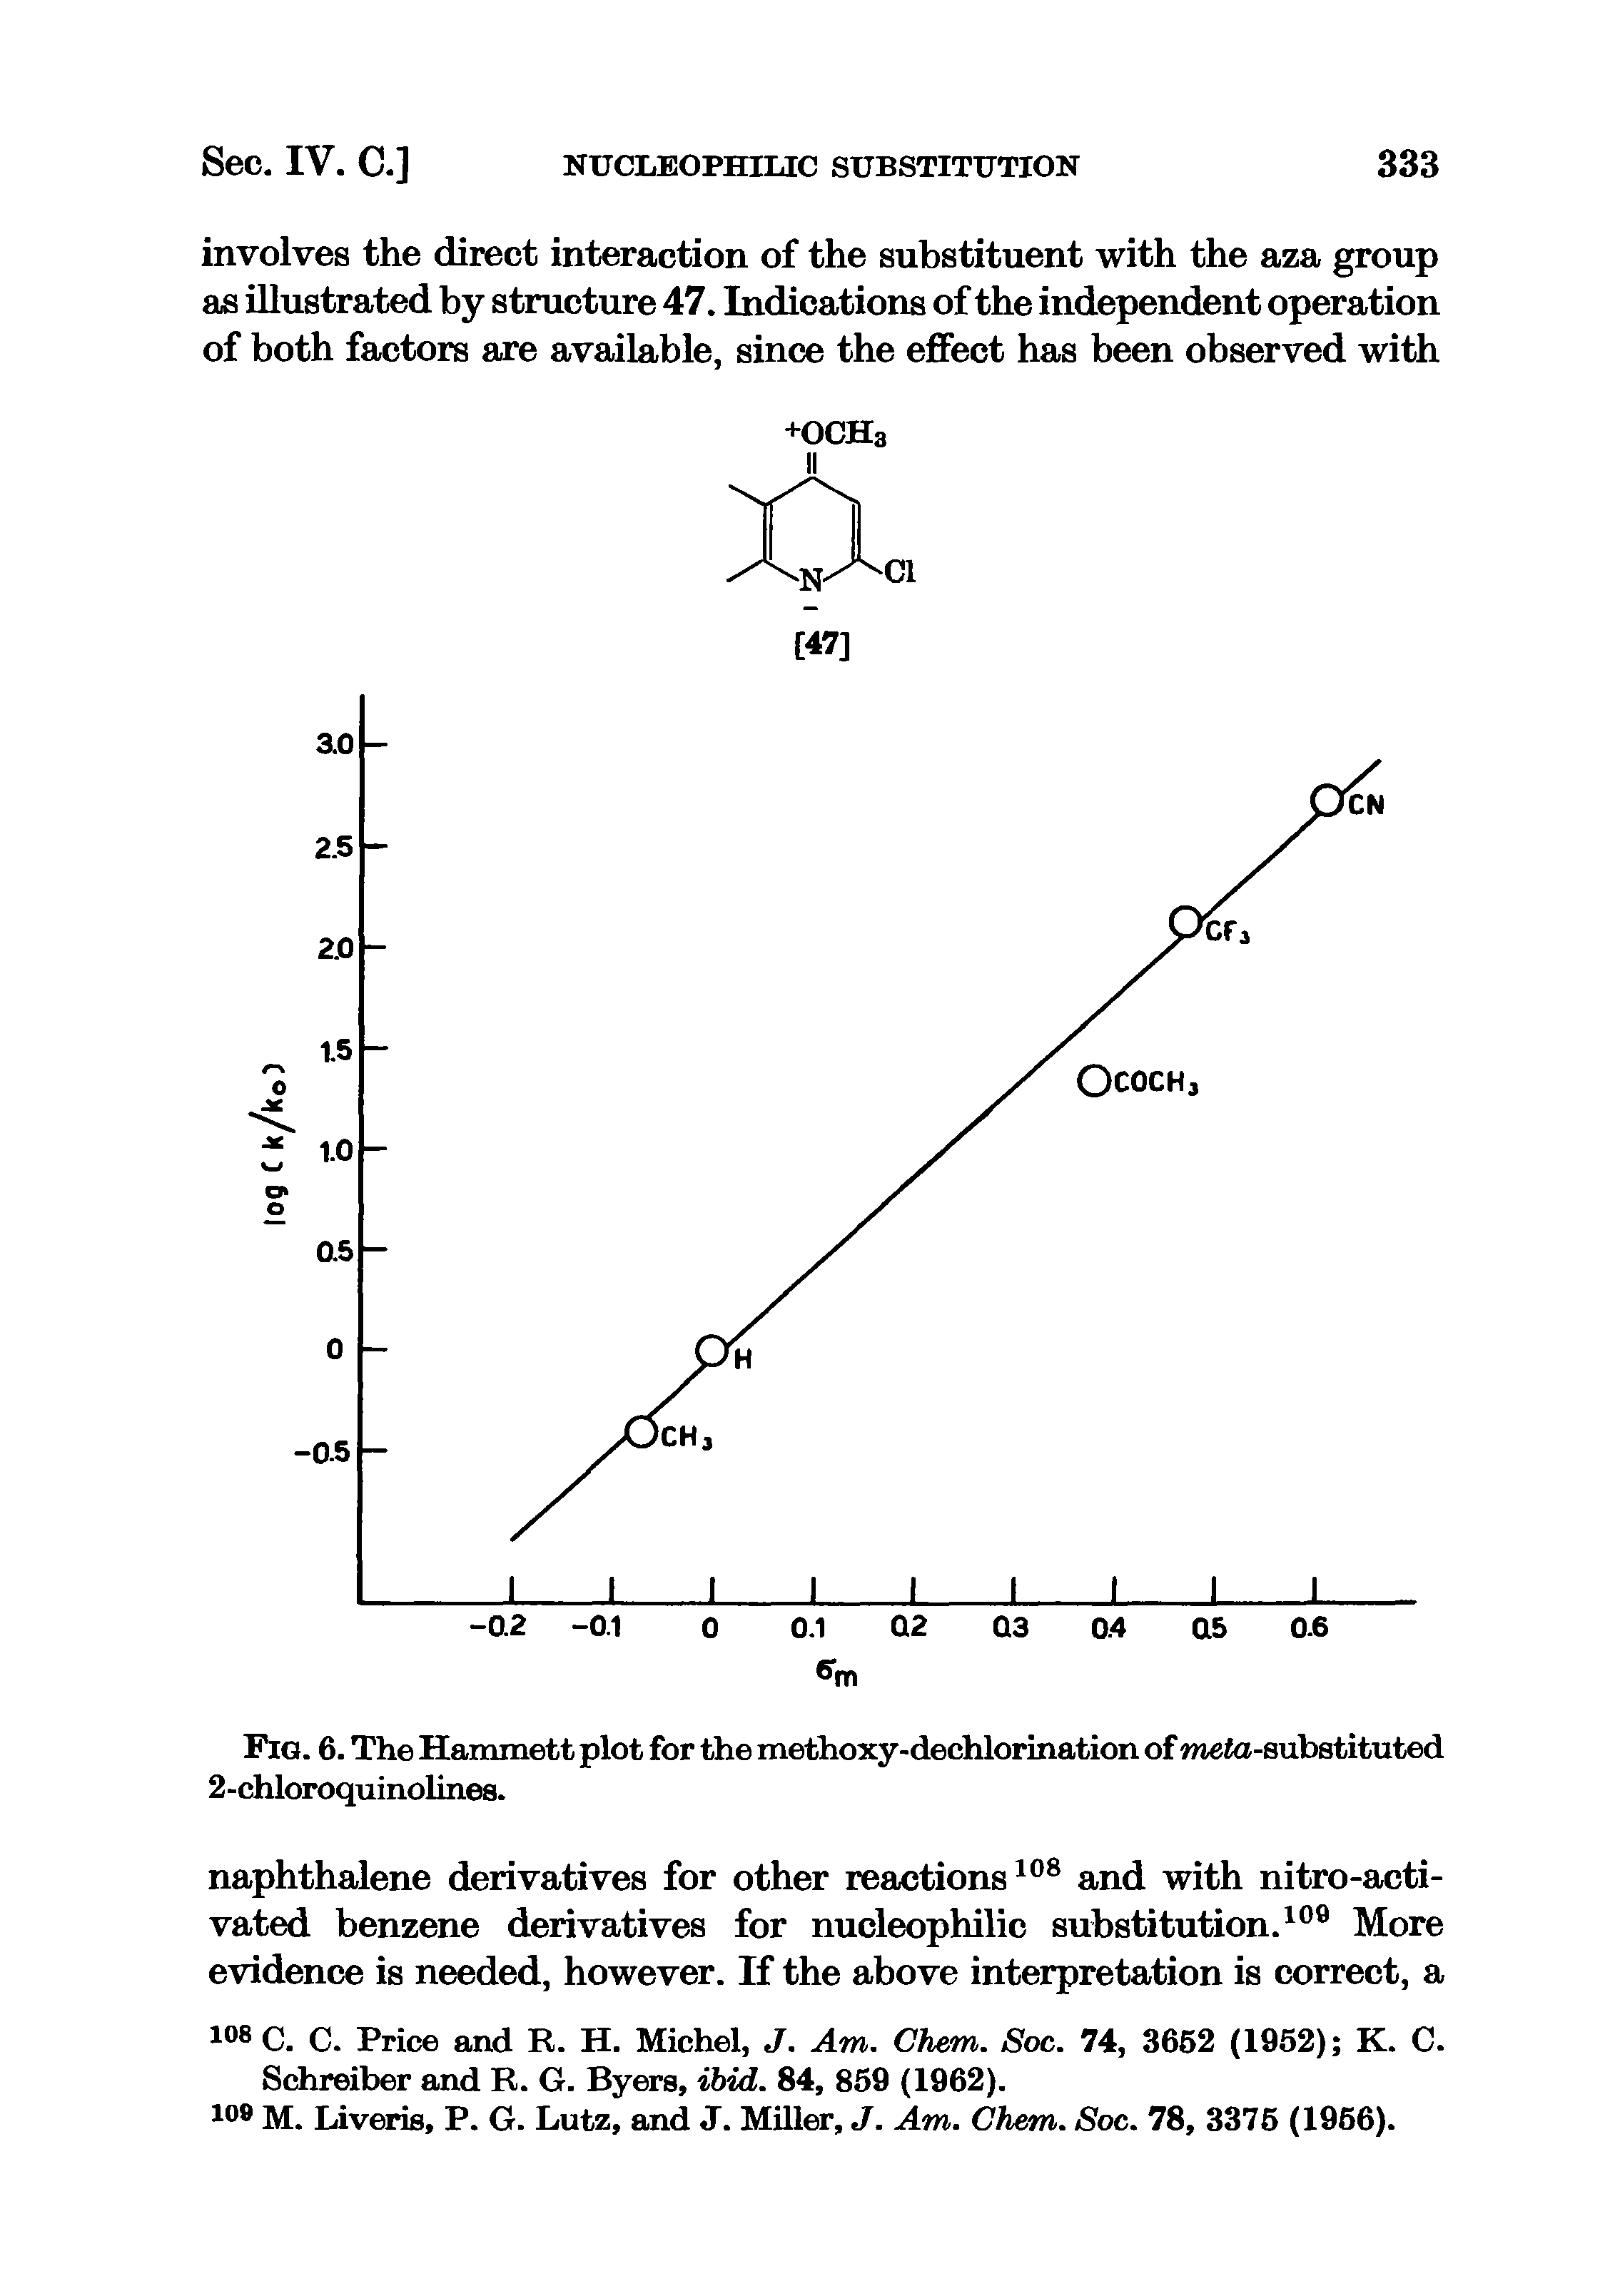 Fig. 6. The Hammett plot for the methoxy-dechlorination of meto-substituted 2-chloroquinolines.